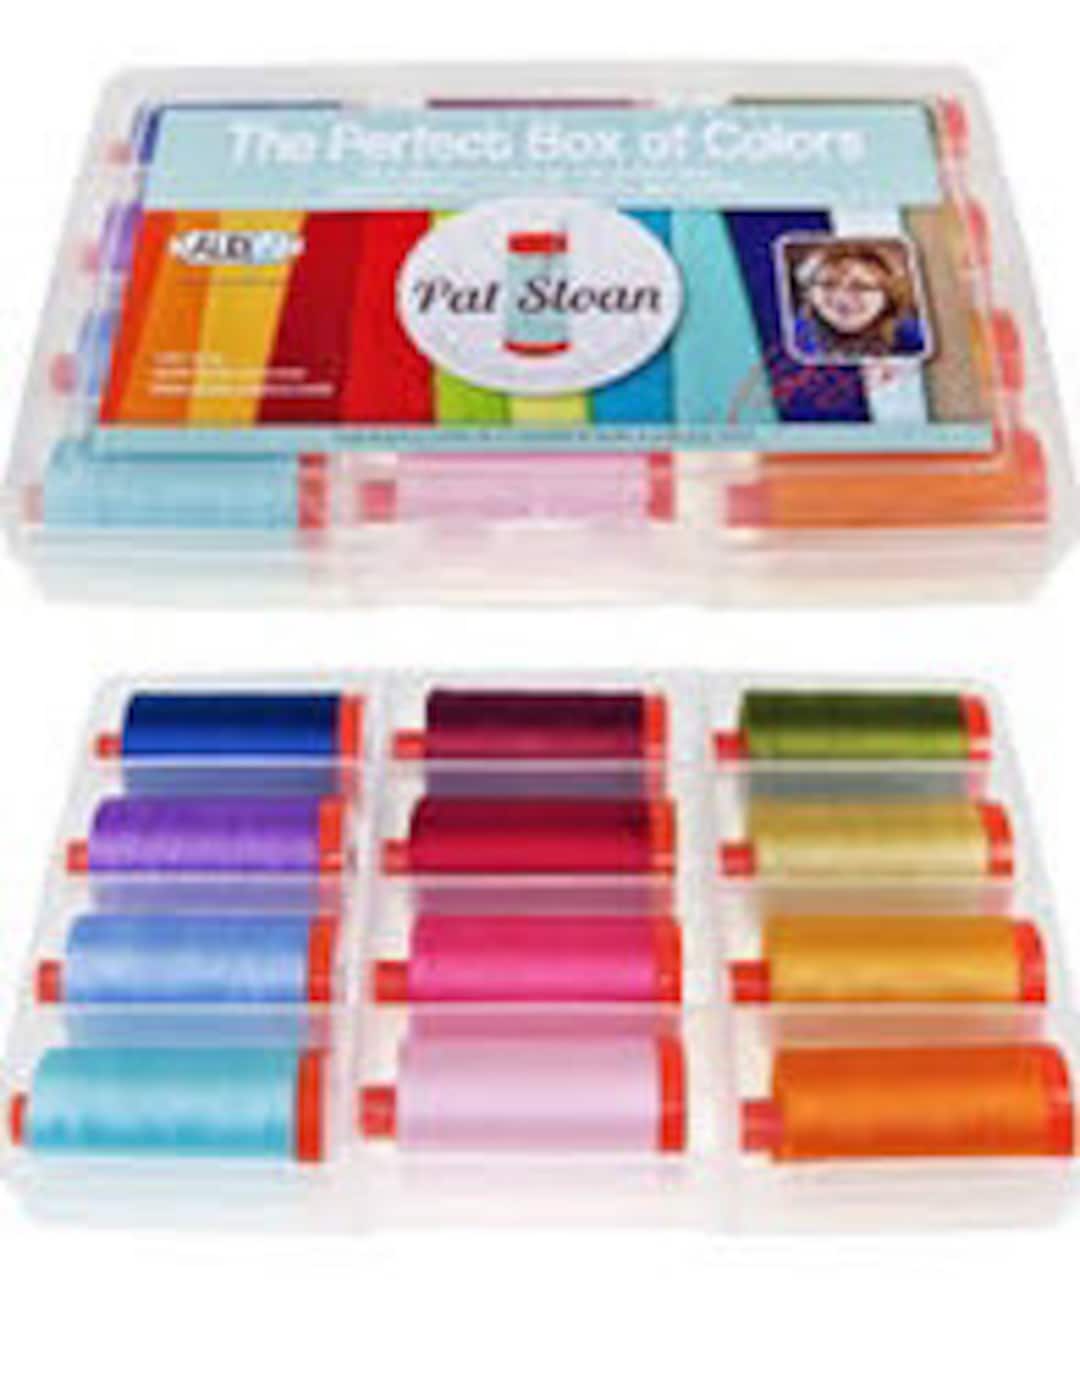 Aurifil Thread Set THE PERFECT BOX OF COLORS By Pat Sloan 50wt Cotton 12  Large (1422 yard) Spools